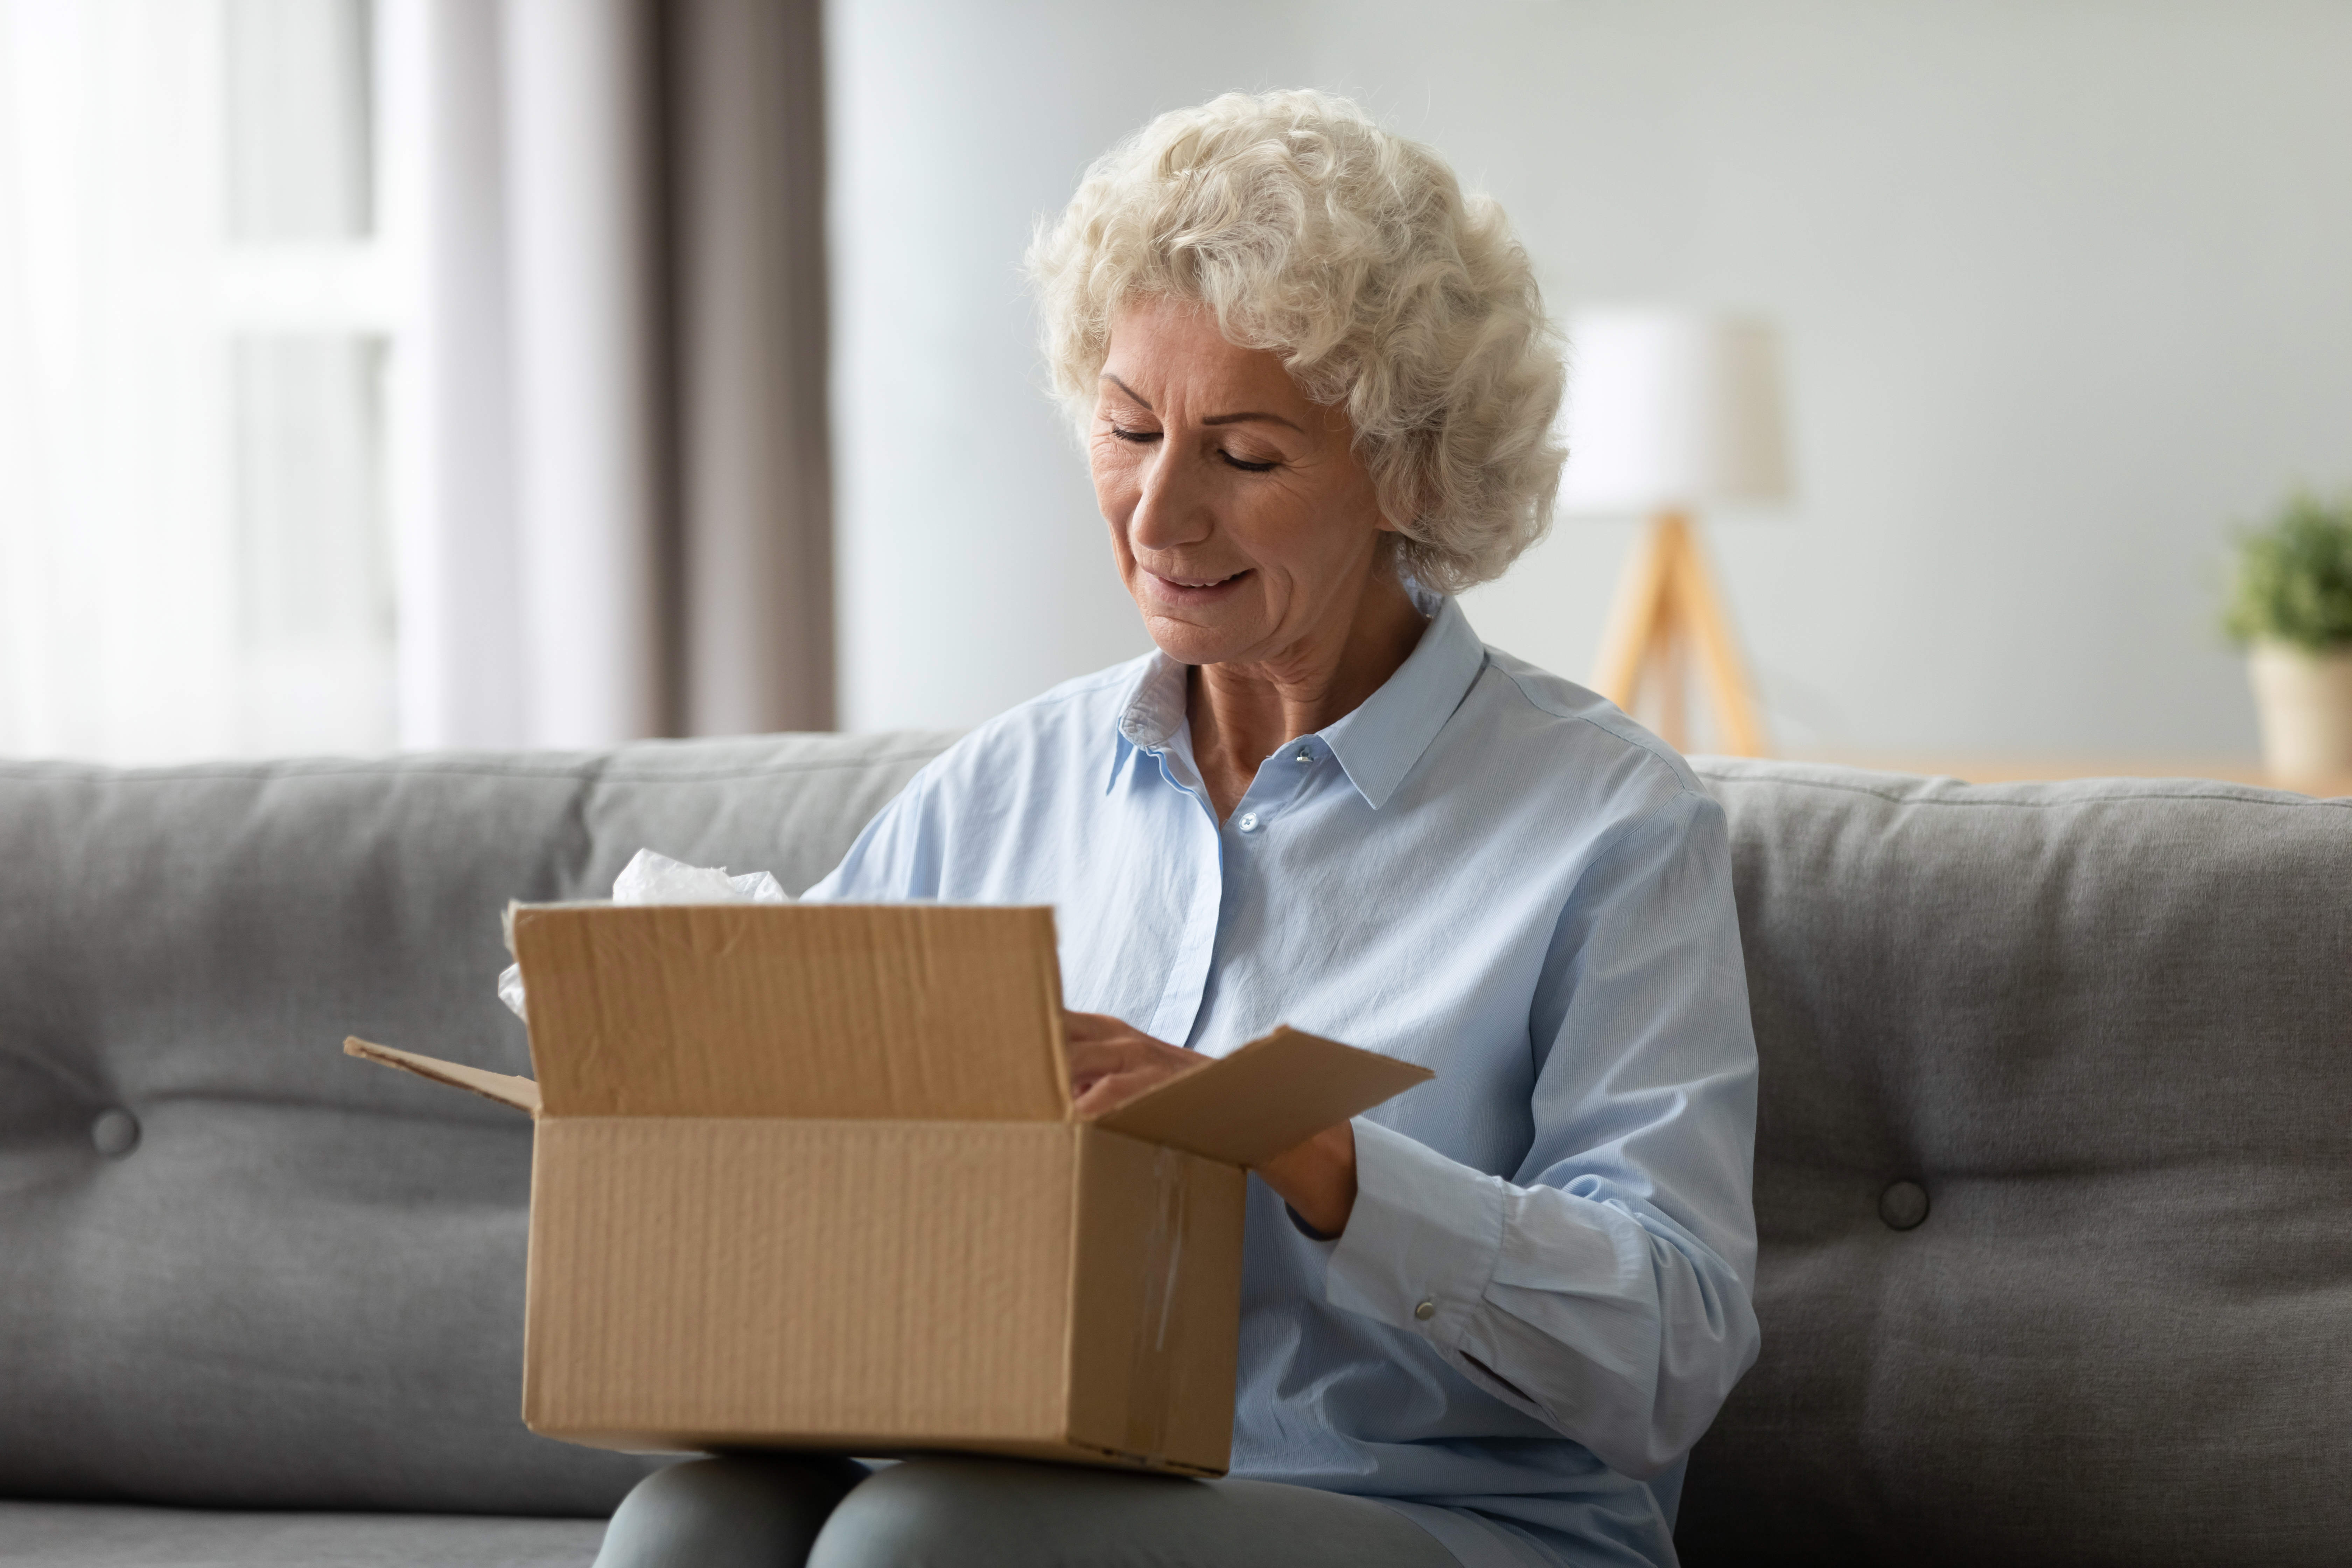 Smiling elderly woman customer receive post shipment parcel at home | Source: Getty Images